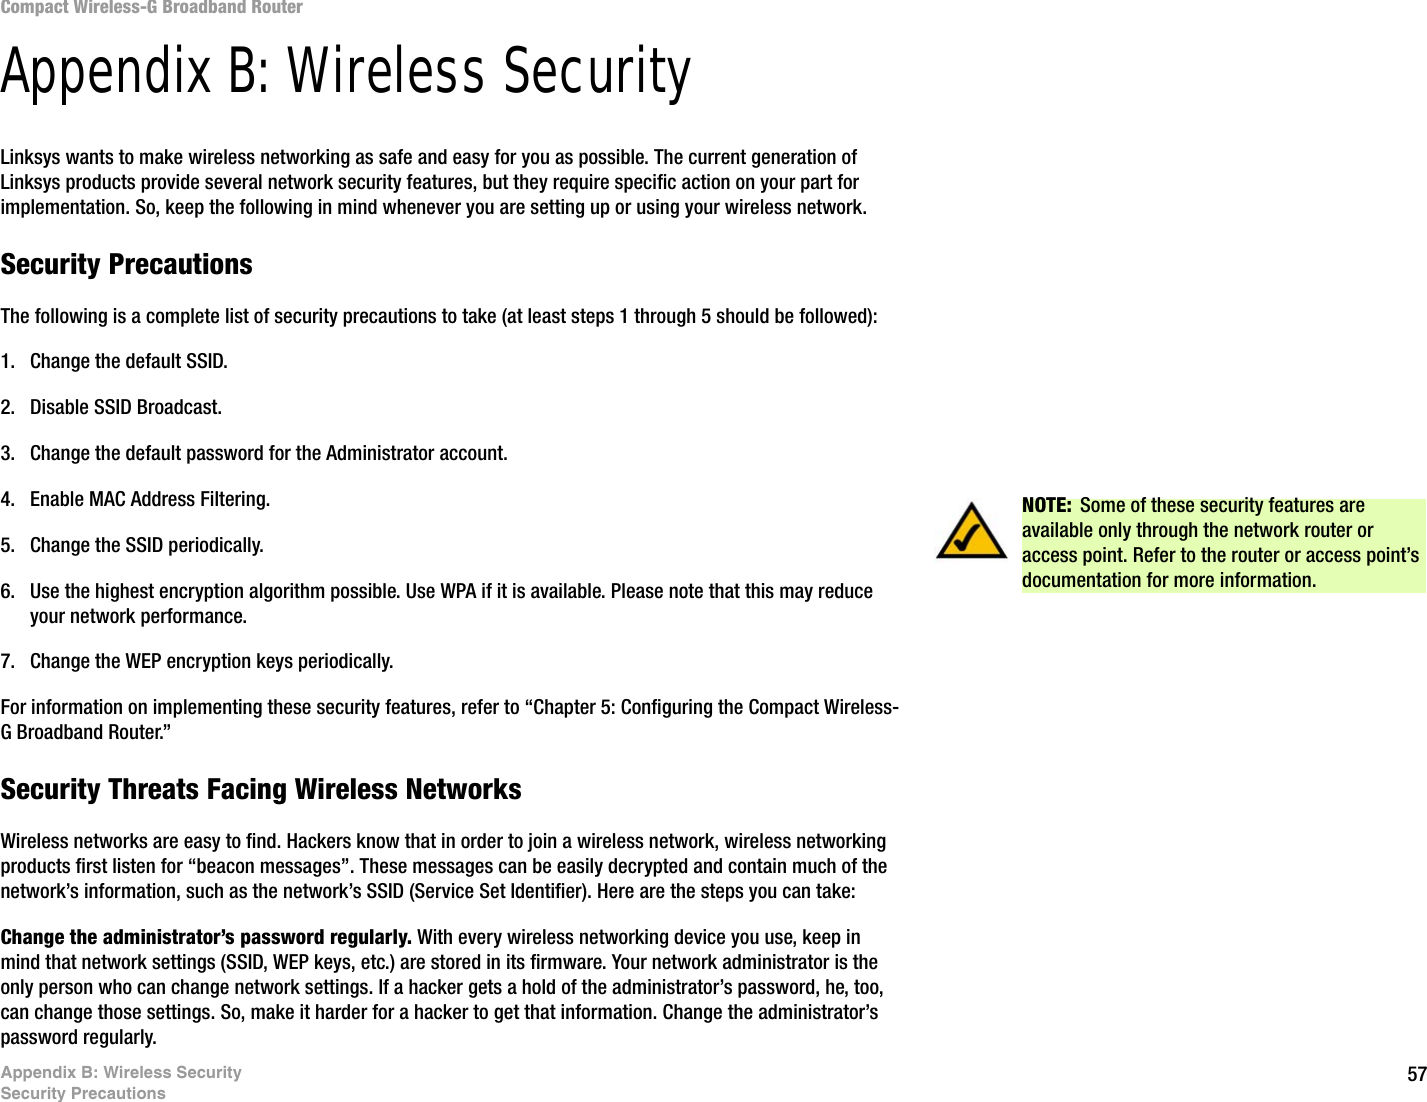 57Appendix B: Wireless SecuritySecurity PrecautionsCompact Wireless-G Broadband RouterAppendix B: Wireless SecurityLinksys wants to make wireless networking as safe and easy for you as possible. The current generation of Linksys products provide several network security features, but they require specific action on your part for implementation. So, keep the following in mind whenever you are setting up or using your wireless network.Security PrecautionsThe following is a complete list of security precautions to take (at least steps 1 through 5 should be followed):1. Change the default SSID. 2. Disable SSID Broadcast. 3. Change the default password for the Administrator account. 4. Enable MAC Address Filtering. 5. Change the SSID periodically. 6. Use the highest encryption algorithm possible. Use WPA if it is available. Please note that this may reduce your network performance. 7. Change the WEP encryption keys periodically. For information on implementing these security features, refer to “Chapter 5: Configuring the Compact Wireless-G Broadband Router.”Security Threats Facing Wireless Networks Wireless networks are easy to find. Hackers know that in order to join a wireless network, wireless networking products first listen for “beacon messages”. These messages can be easily decrypted and contain much of the network’s information, such as the network’s SSID (Service Set Identifier). Here are the steps you can take:Change the administrator’s password regularly. With every wireless networking device you use, keep in mind that network settings (SSID, WEP keys, etc.) are stored in its firmware. Your network administrator is the only person who can change network settings. If a hacker gets a hold of the administrator’s password, he, too, can change those settings. So, make it harder for a hacker to get that information. Change the administrator’s password regularly.NOTE: Some of these security features are available only through the network router or access point. Refer to the router or access point’s documentation for more information.